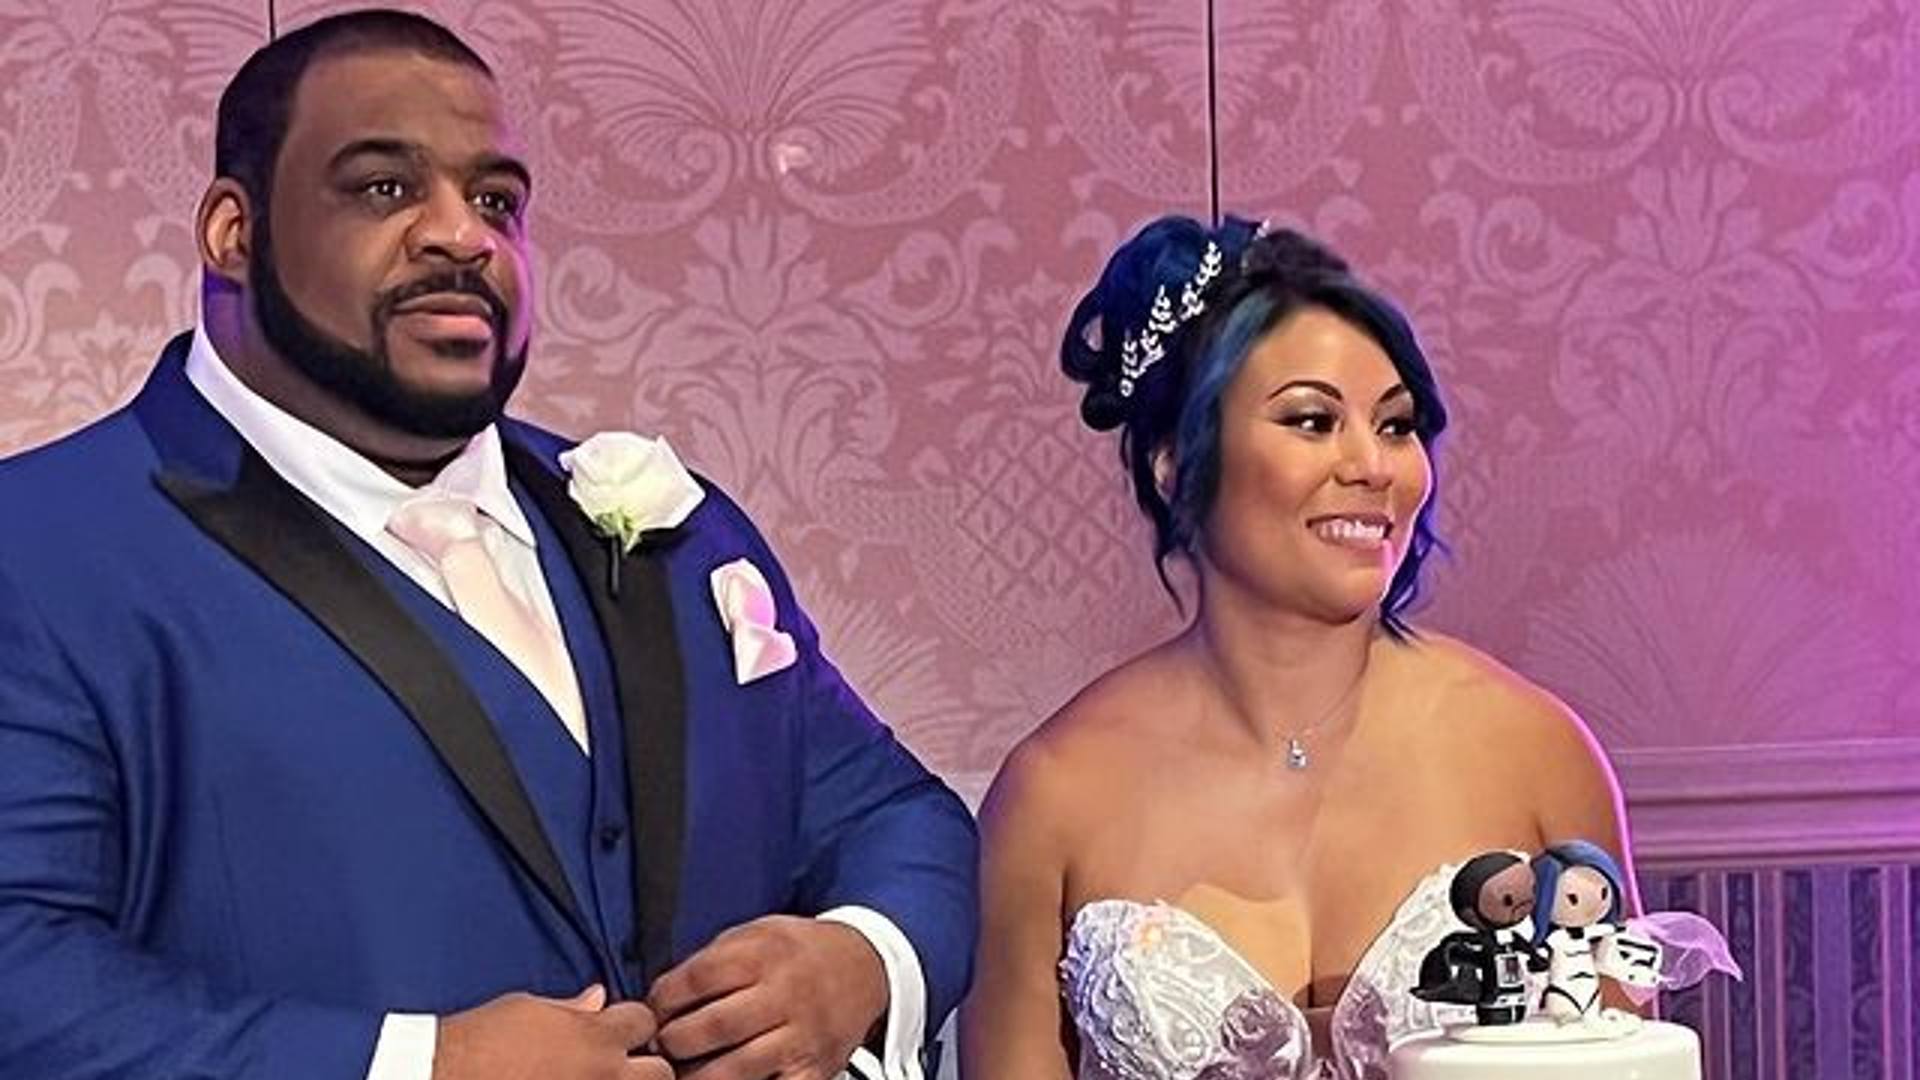 Former WWE superstar Keith Lee ties the knot with Mia Yim